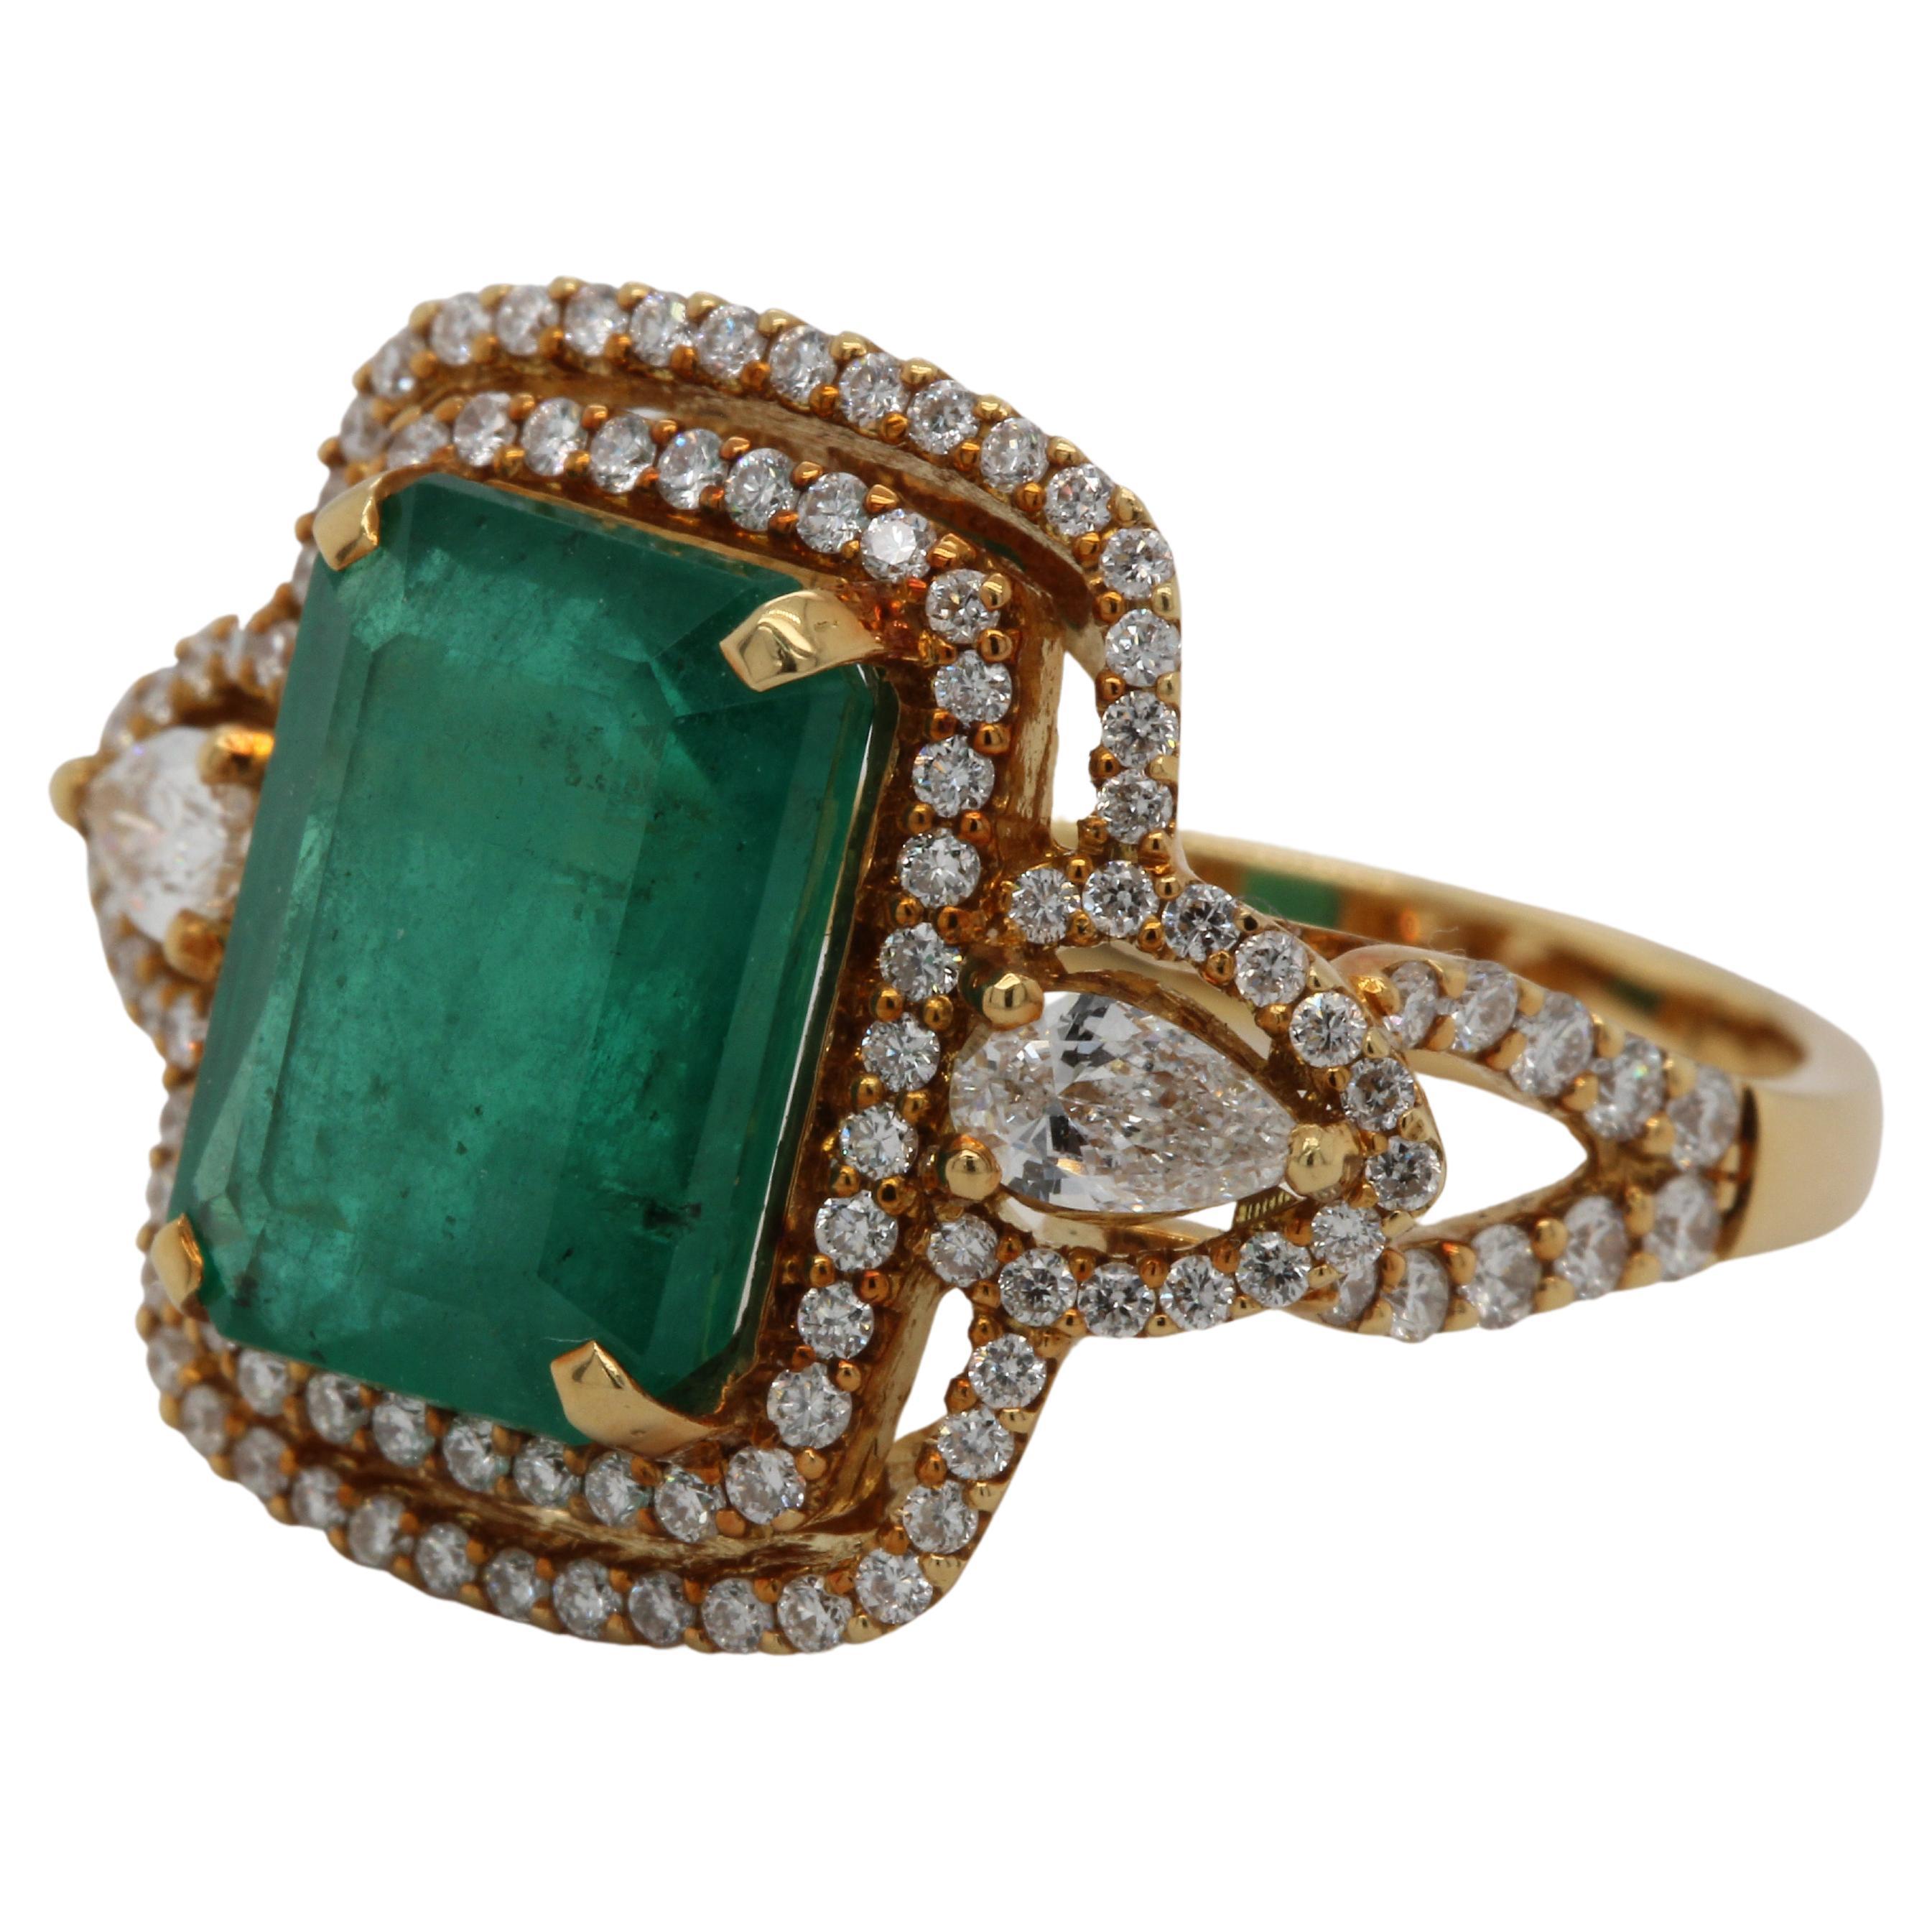 4.59 Carat Emerald And Diamond Ring In 18 Karat Gold For Sale 1